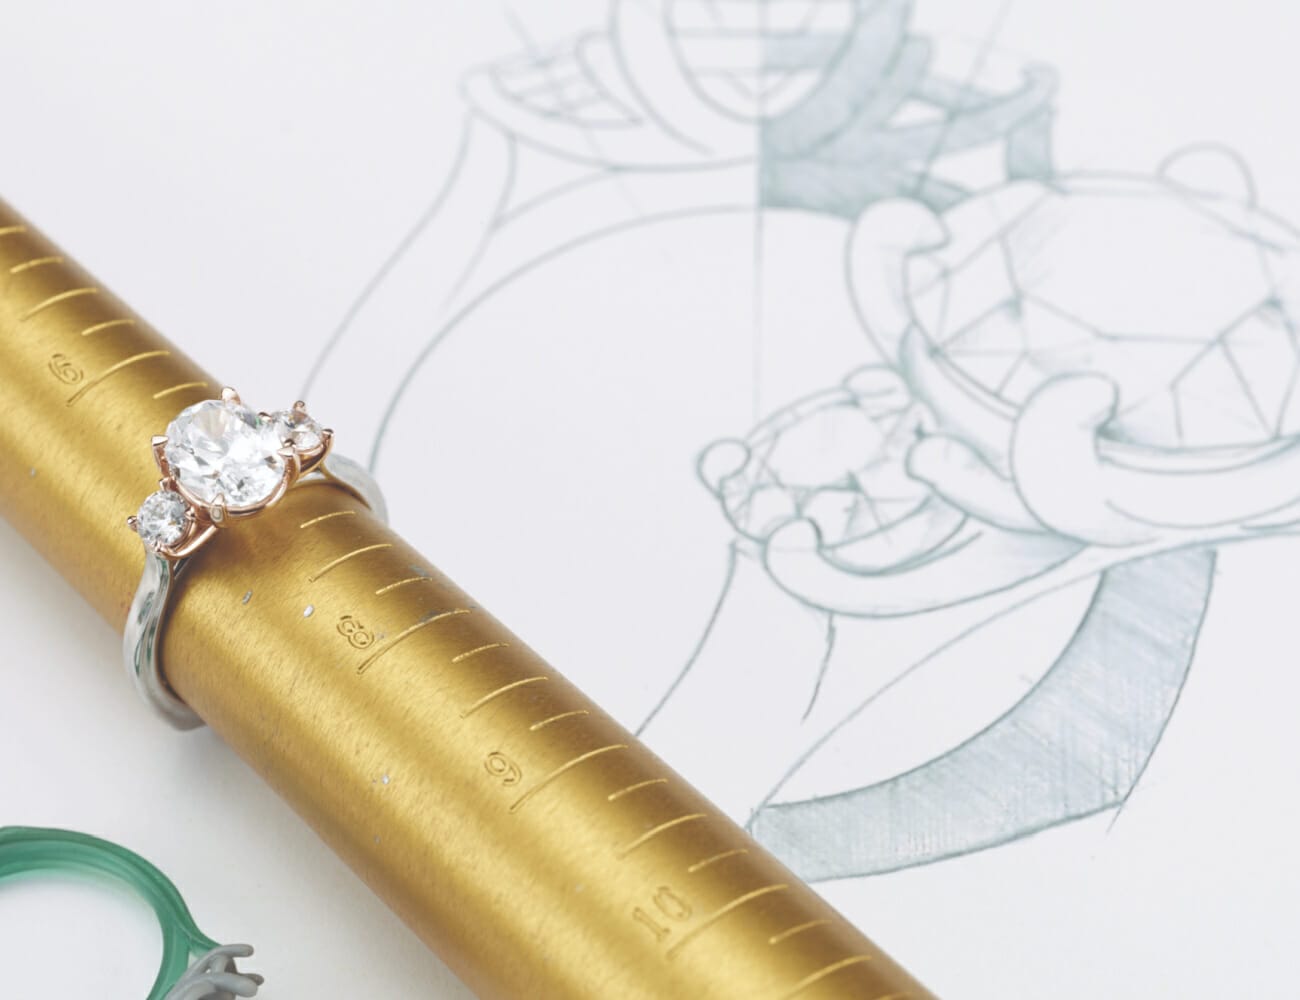 A ring on a ring sizing pole, sitting beside it's bespoke drawings and designs, with the prototype setting on the left.